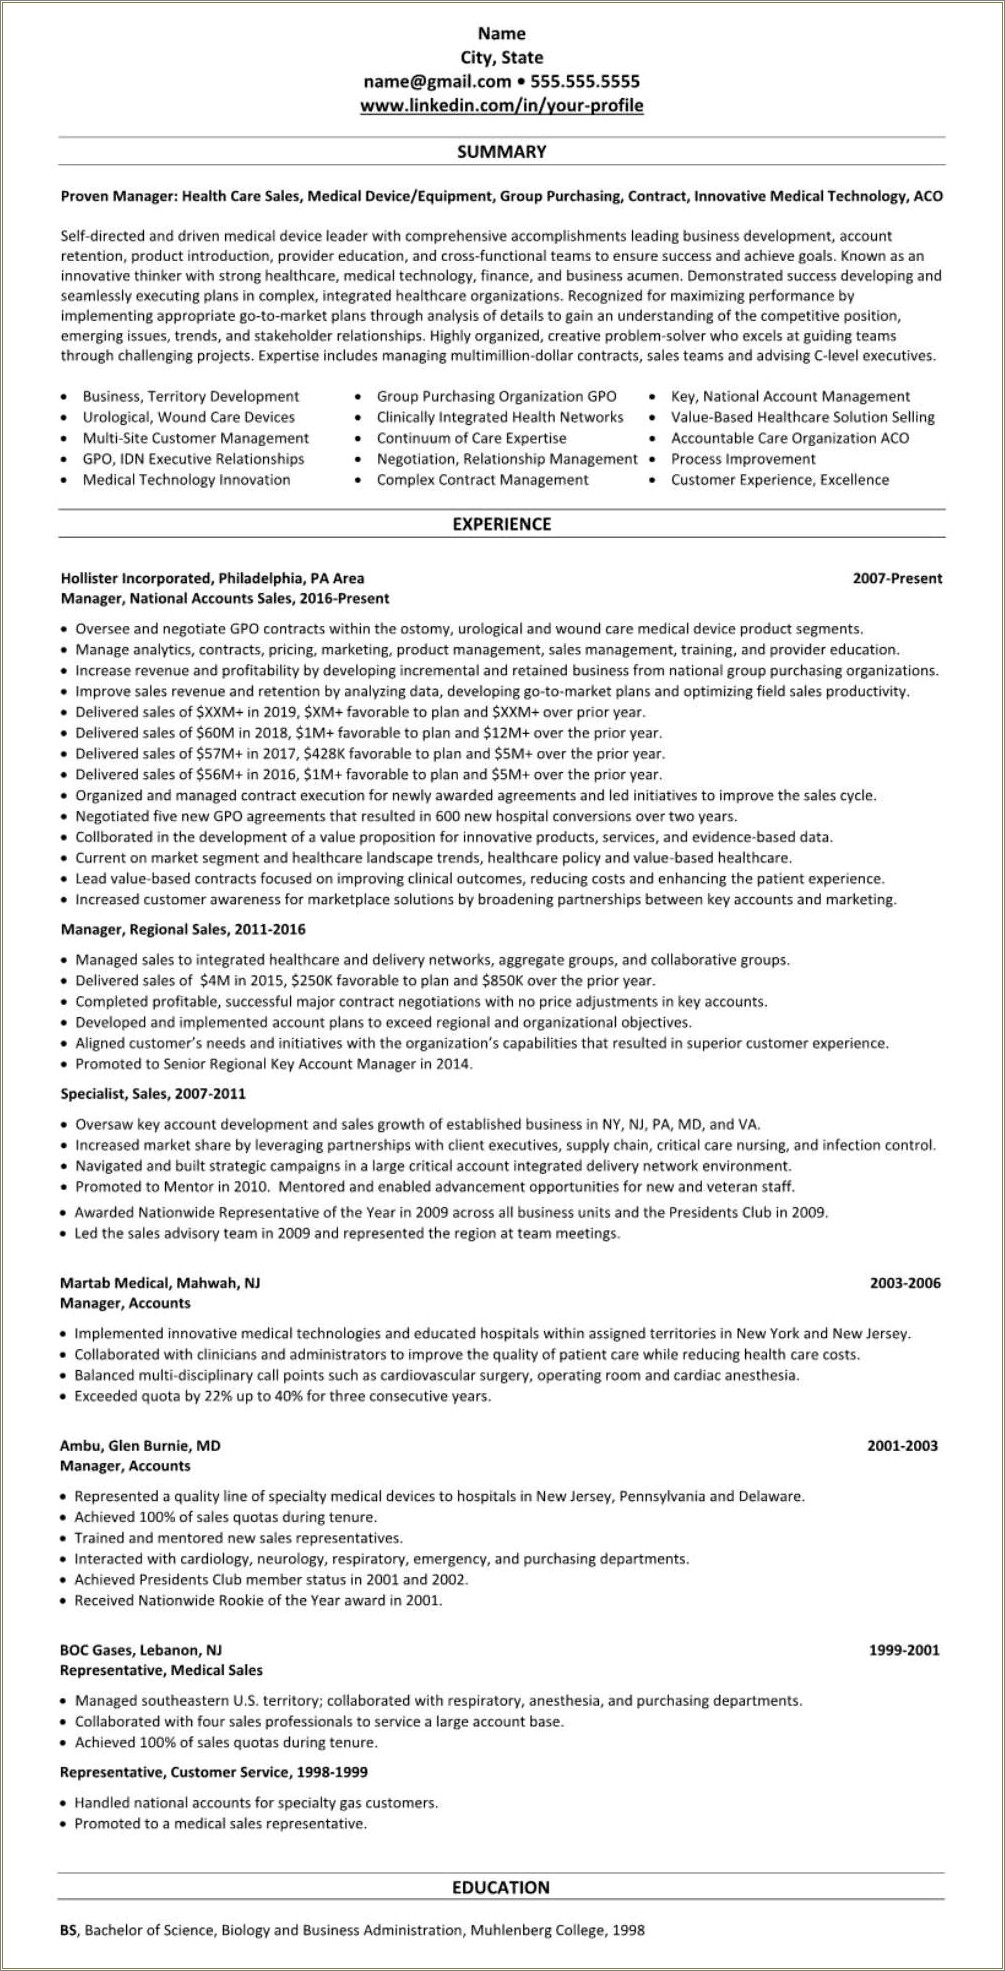 Personal Skills Section Of Healthcare Resume Reddit